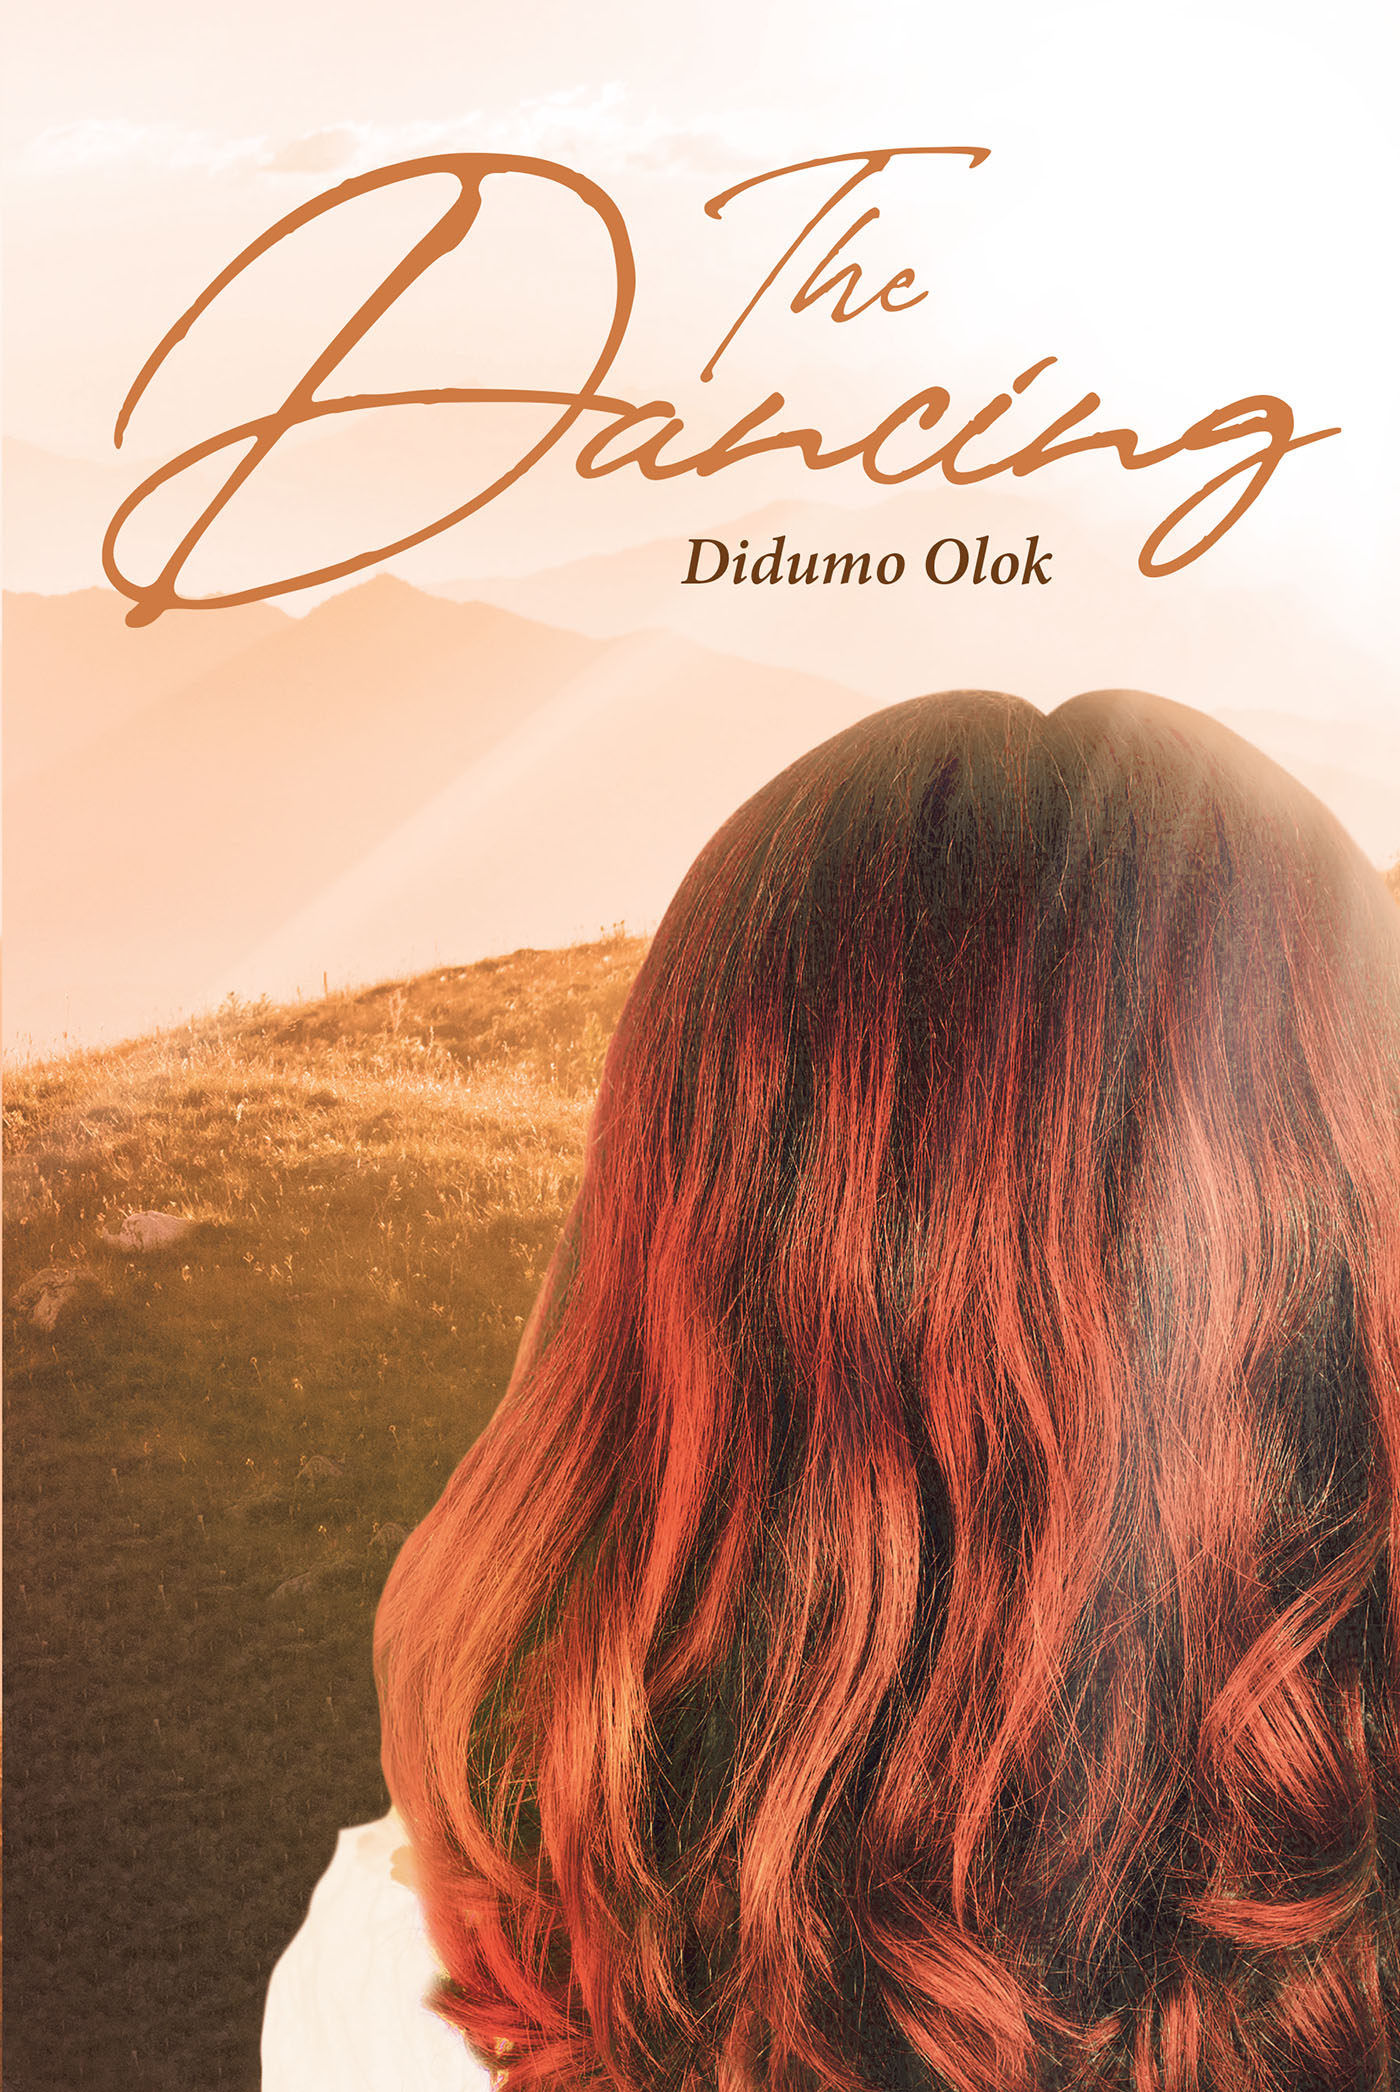 The Dancing Cover Image